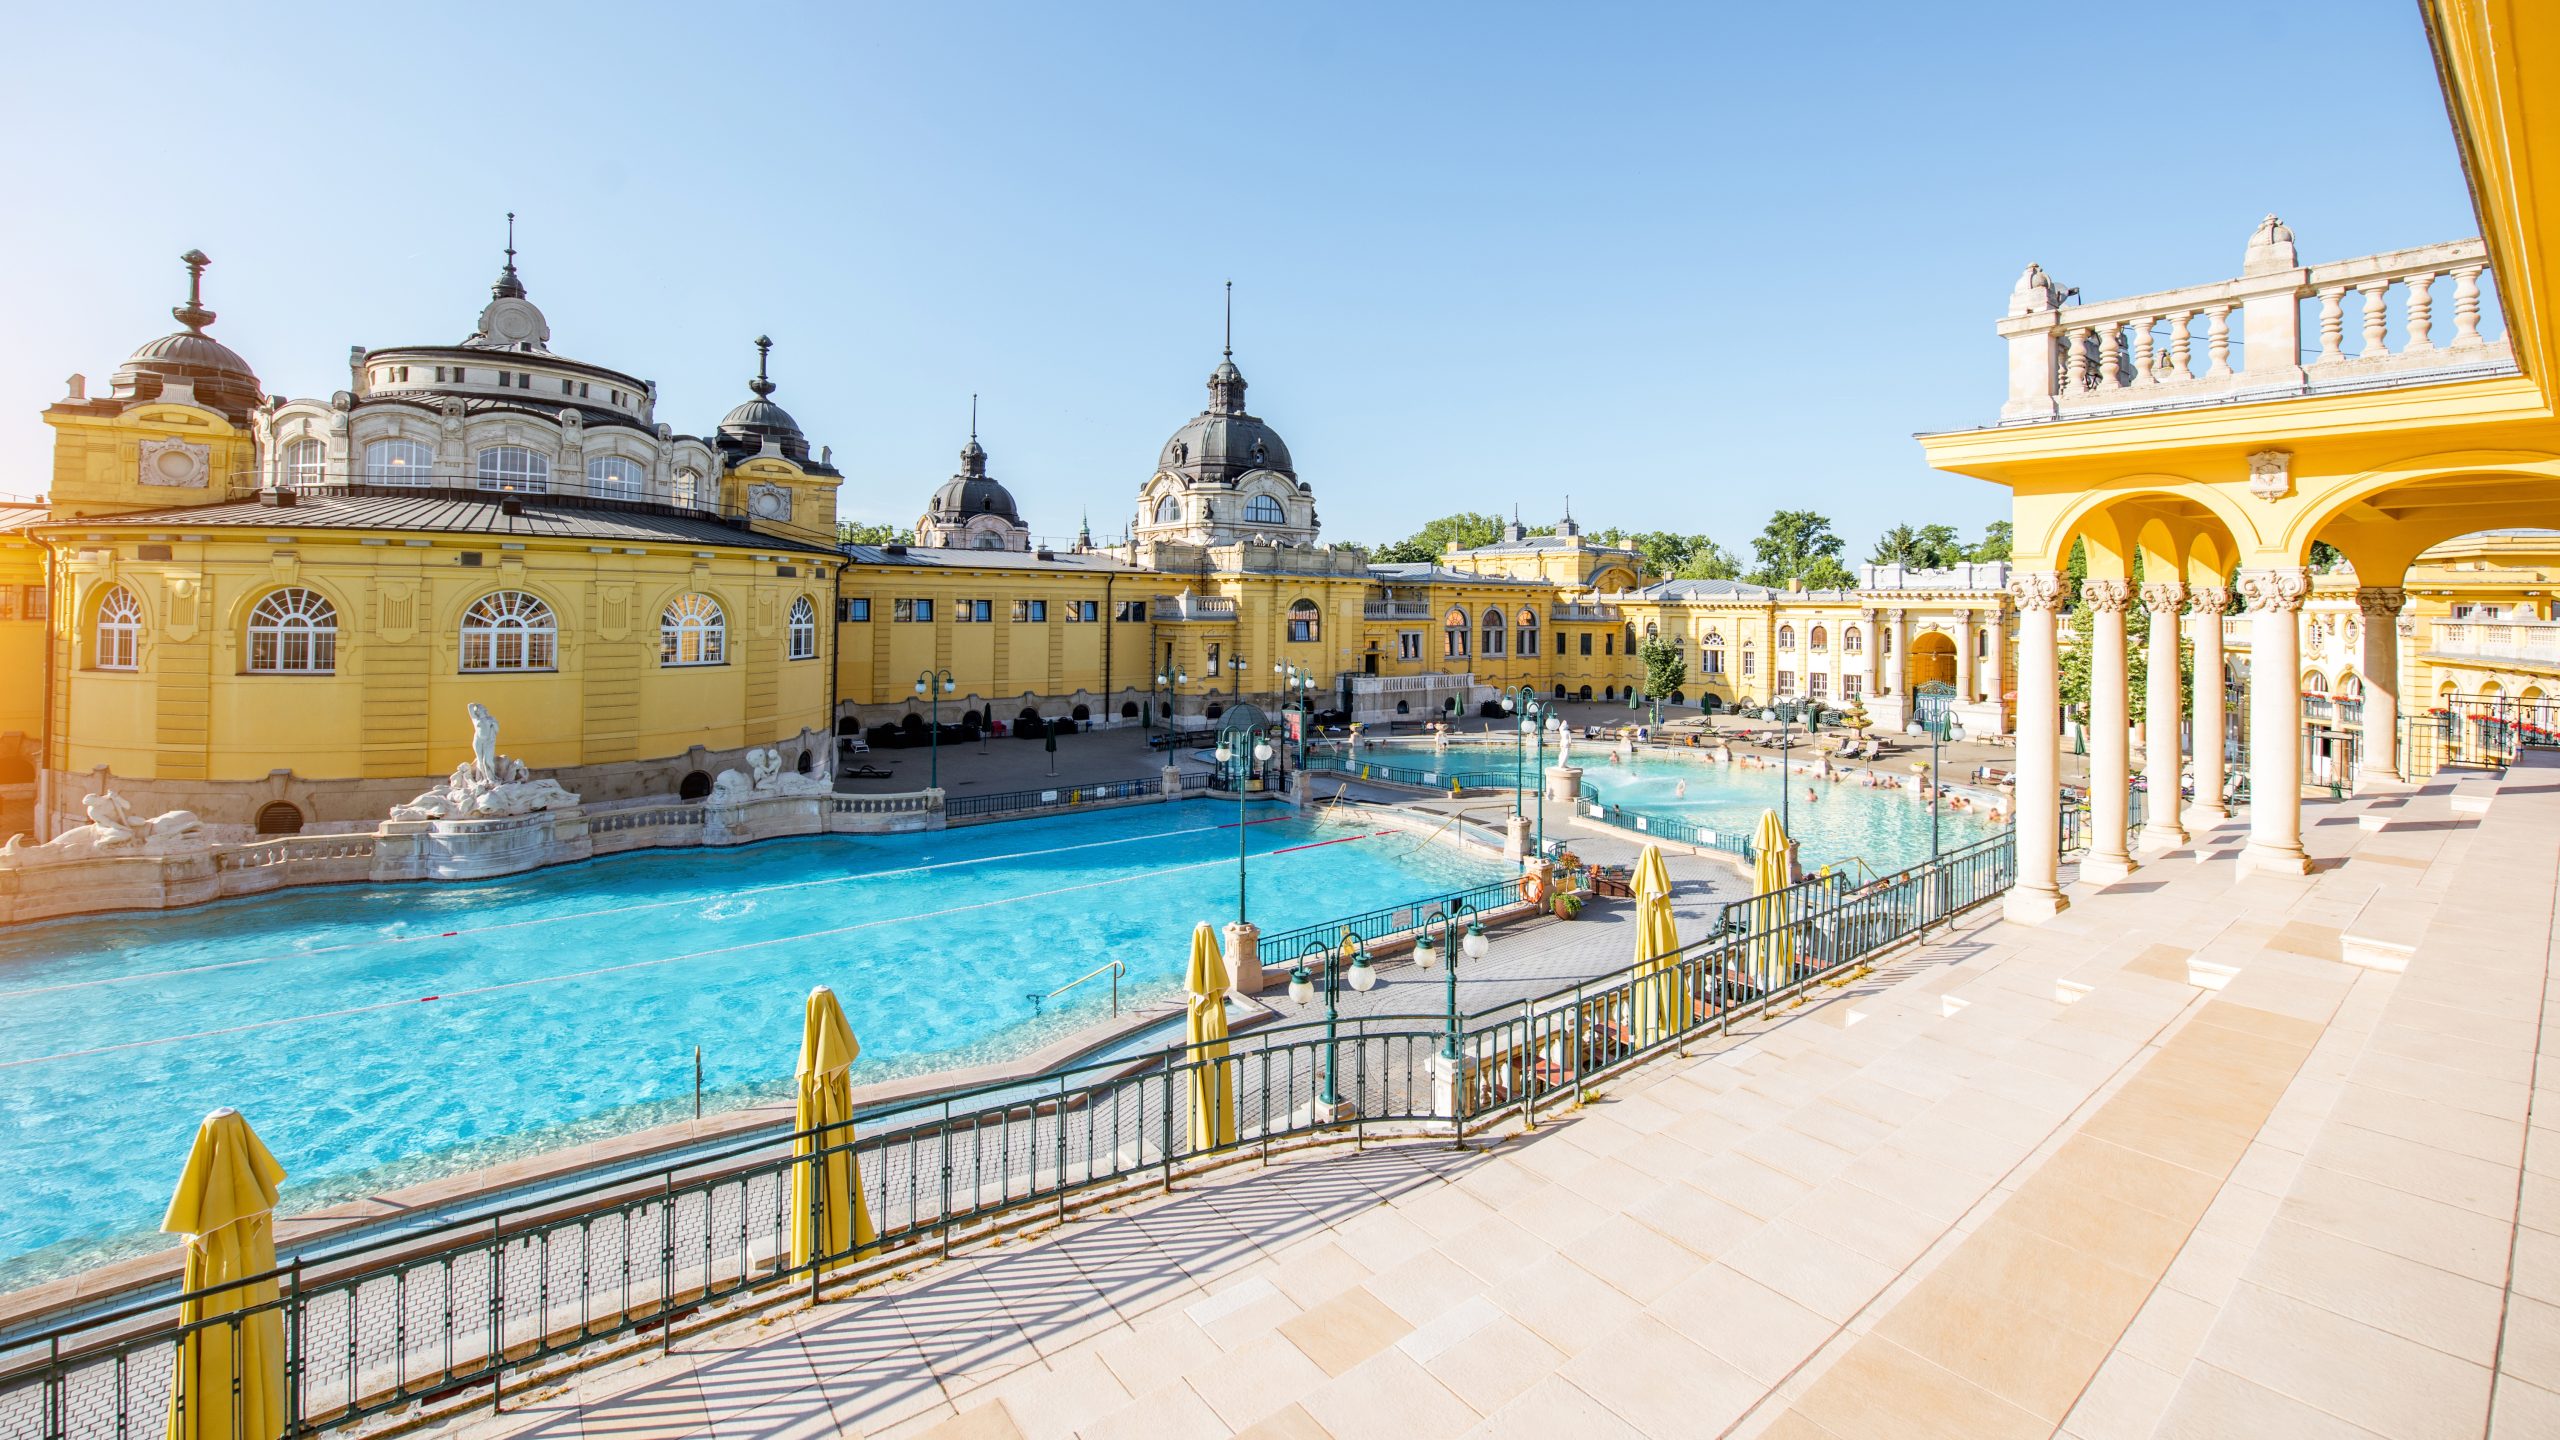 Relax in the Széchenyi thermal bath - fifth thing in the 10 best things to do in Hungary